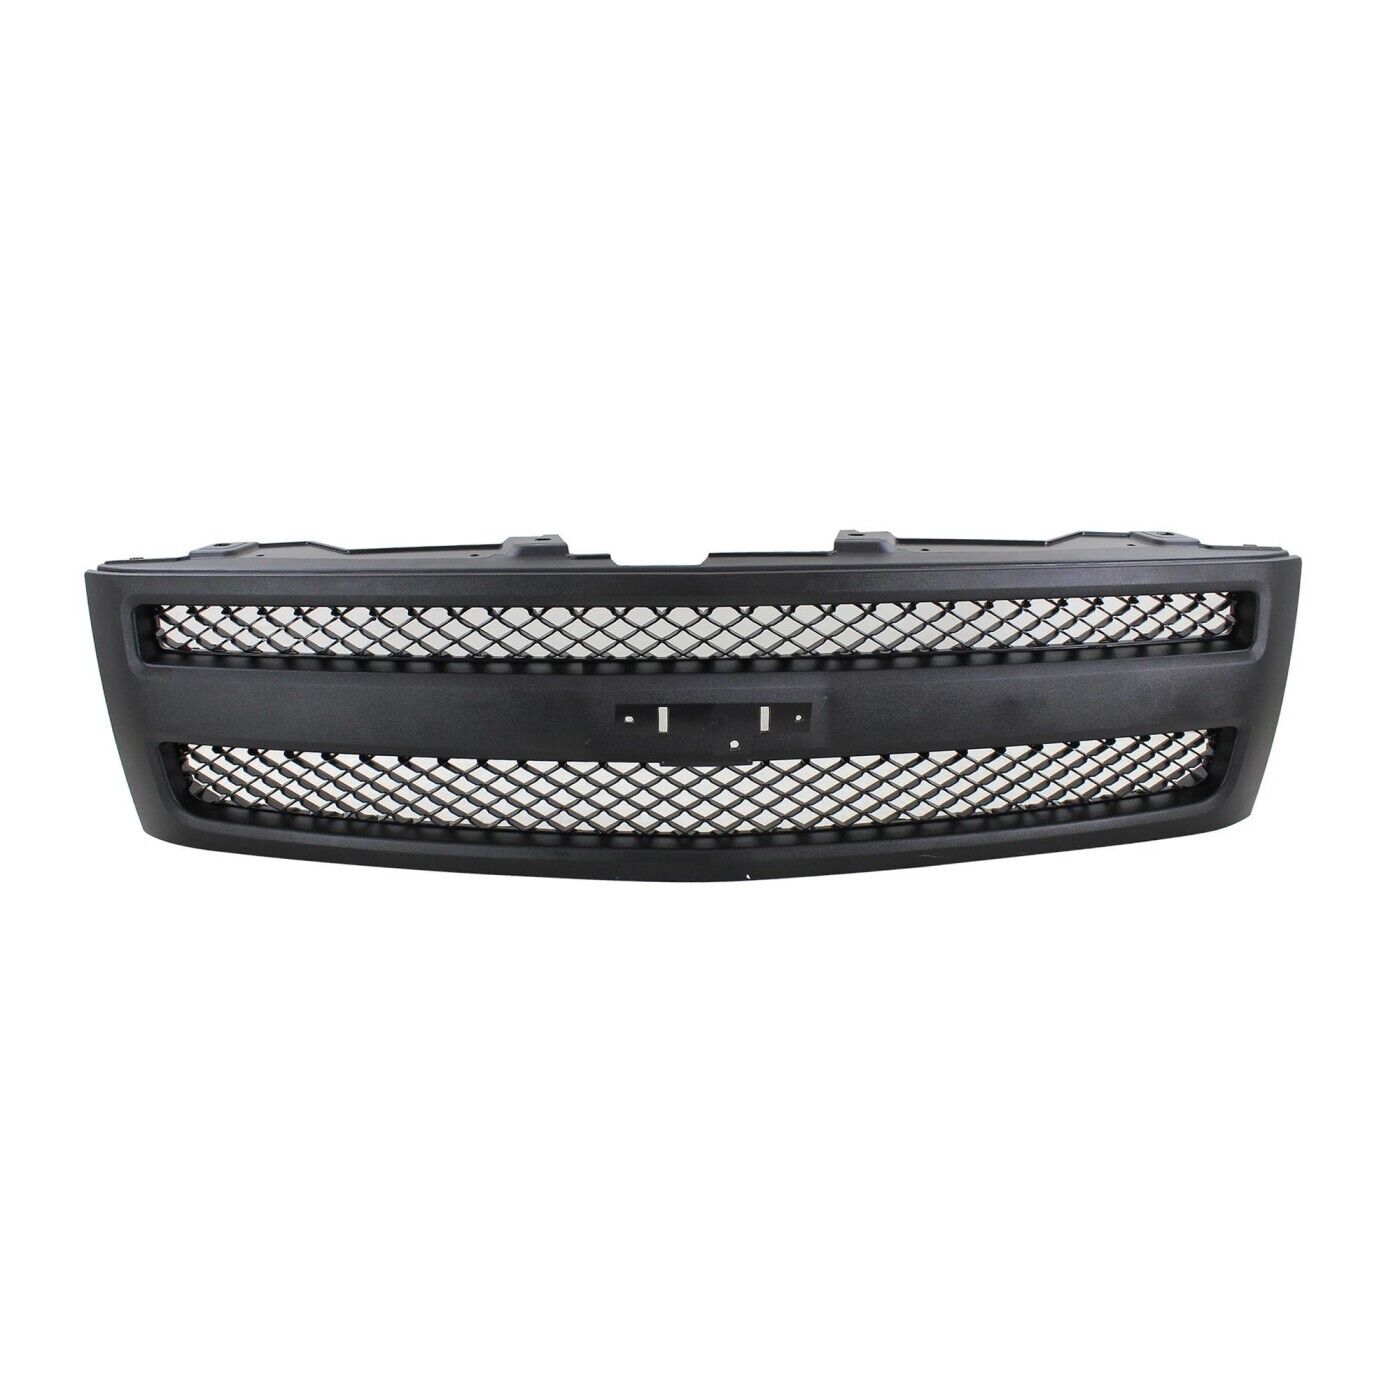 Grille Assembly For 2007-13 Silverado 1500 Textured Black With Emblem Provision